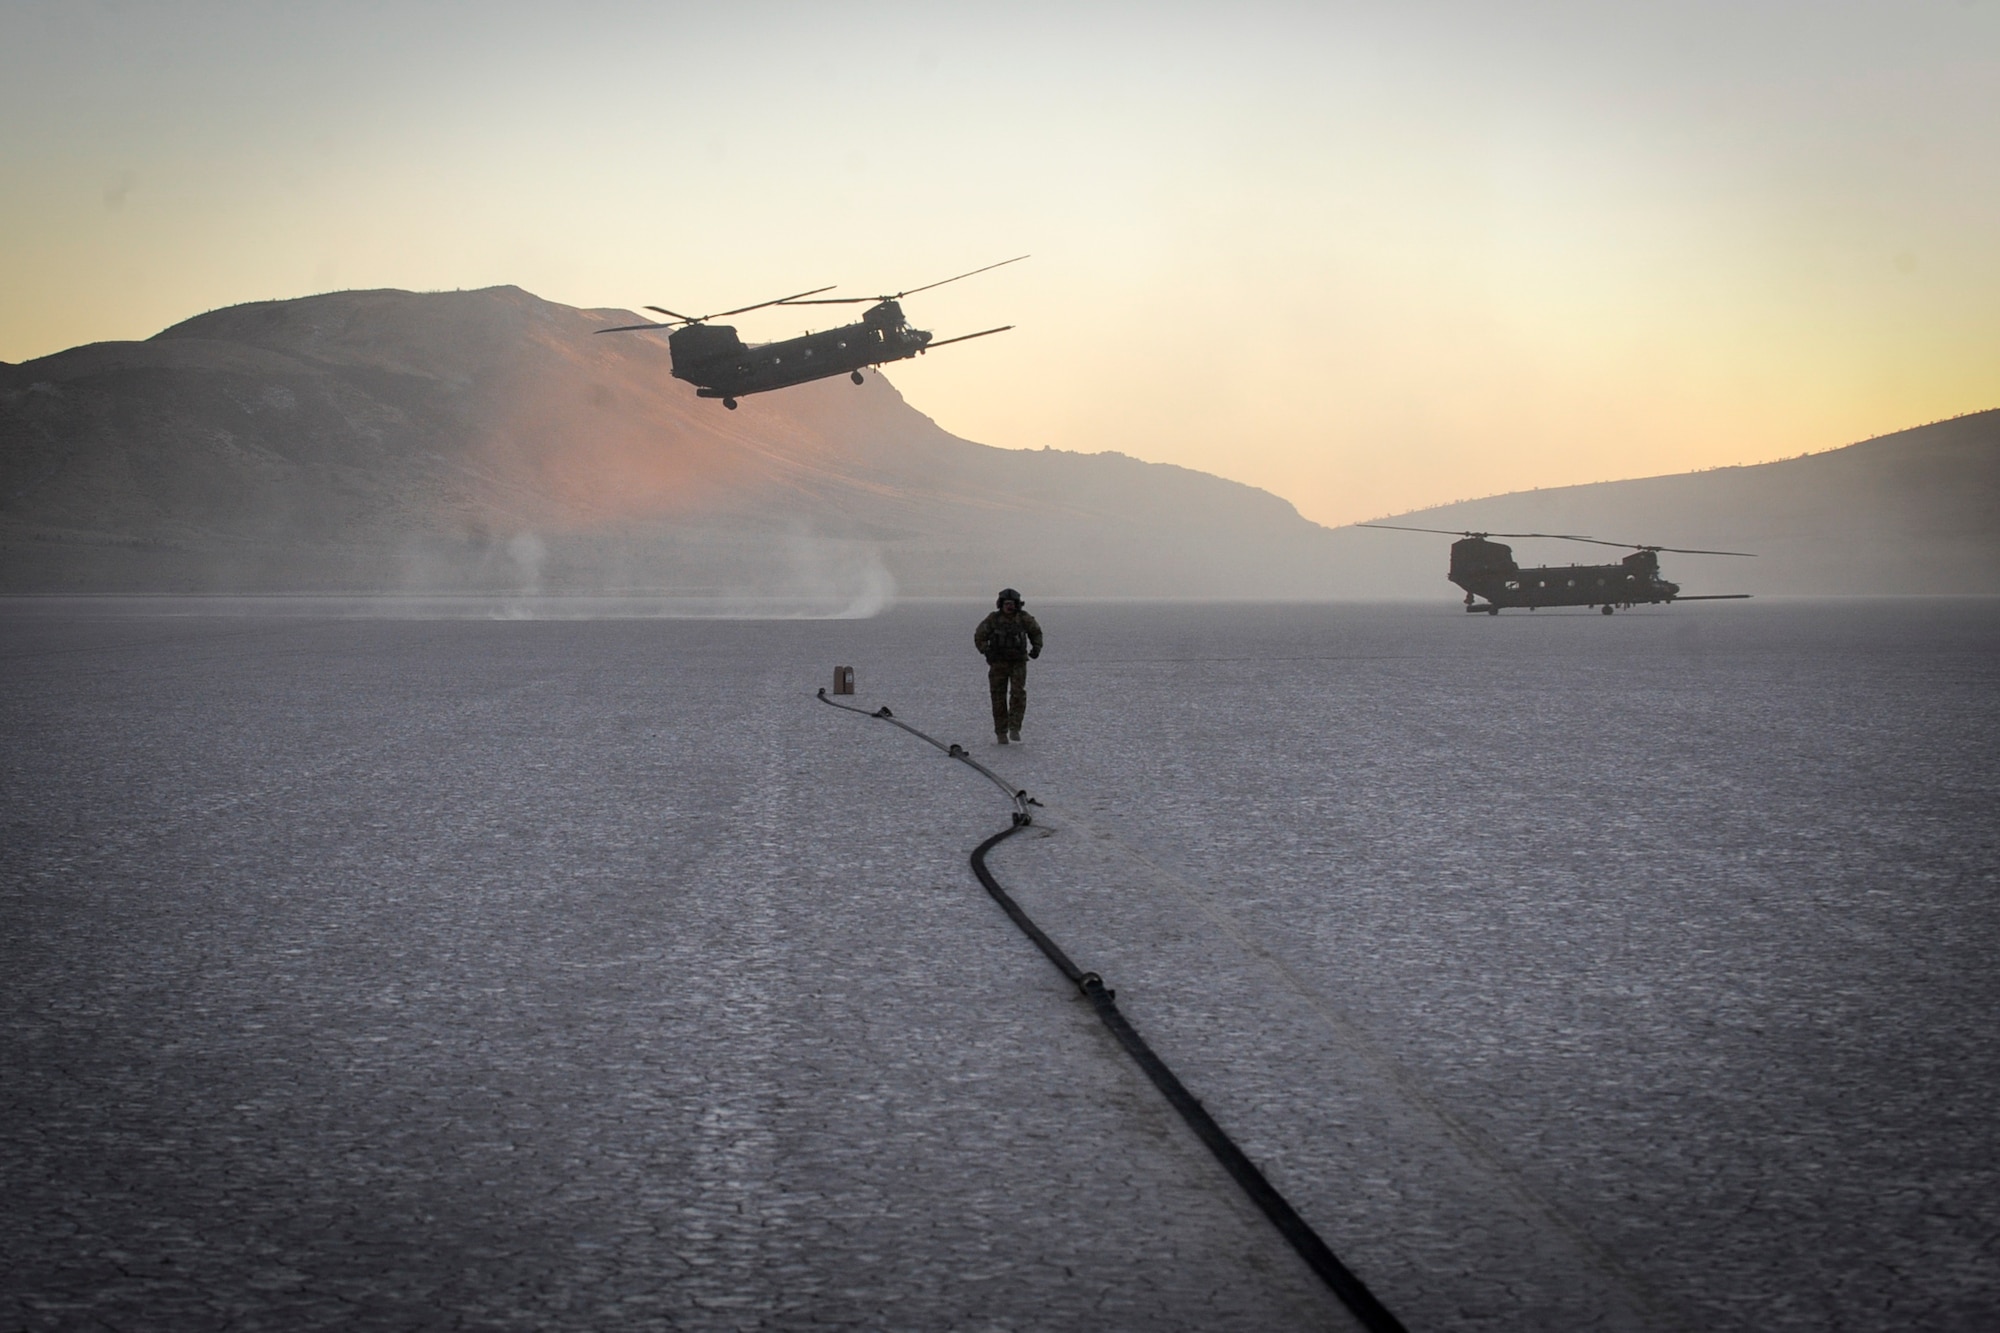 U.S. Army flying crew chief assigned to the 160th Special Operations Aviation Regiment sets up the forward area refueling point with two MH-47 aircraft at the Delmar desert landing strip, Nev., Dec. 2. The forward area refueling site was enabled by special tactics Airmen providing security at the landing zone and was conducted within a highly contested environment with an AC-130U providing close air support. (U.S. Air Force photo by Major Richie Harr)